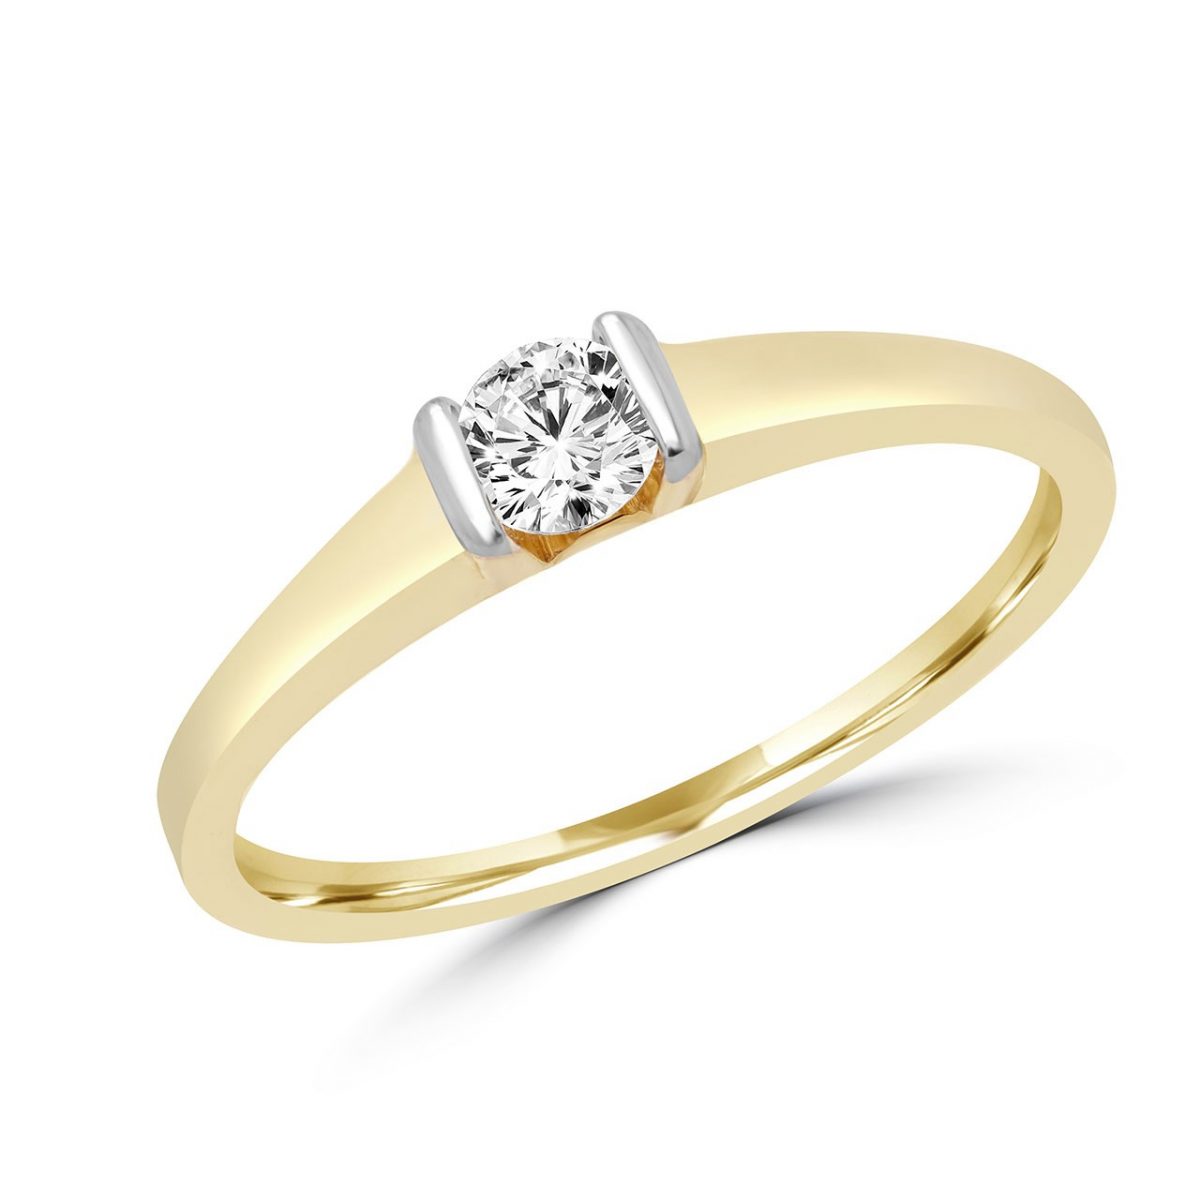 Round cut solitaire engagement ring 0.22 (ctw) in 14 k yellow gold